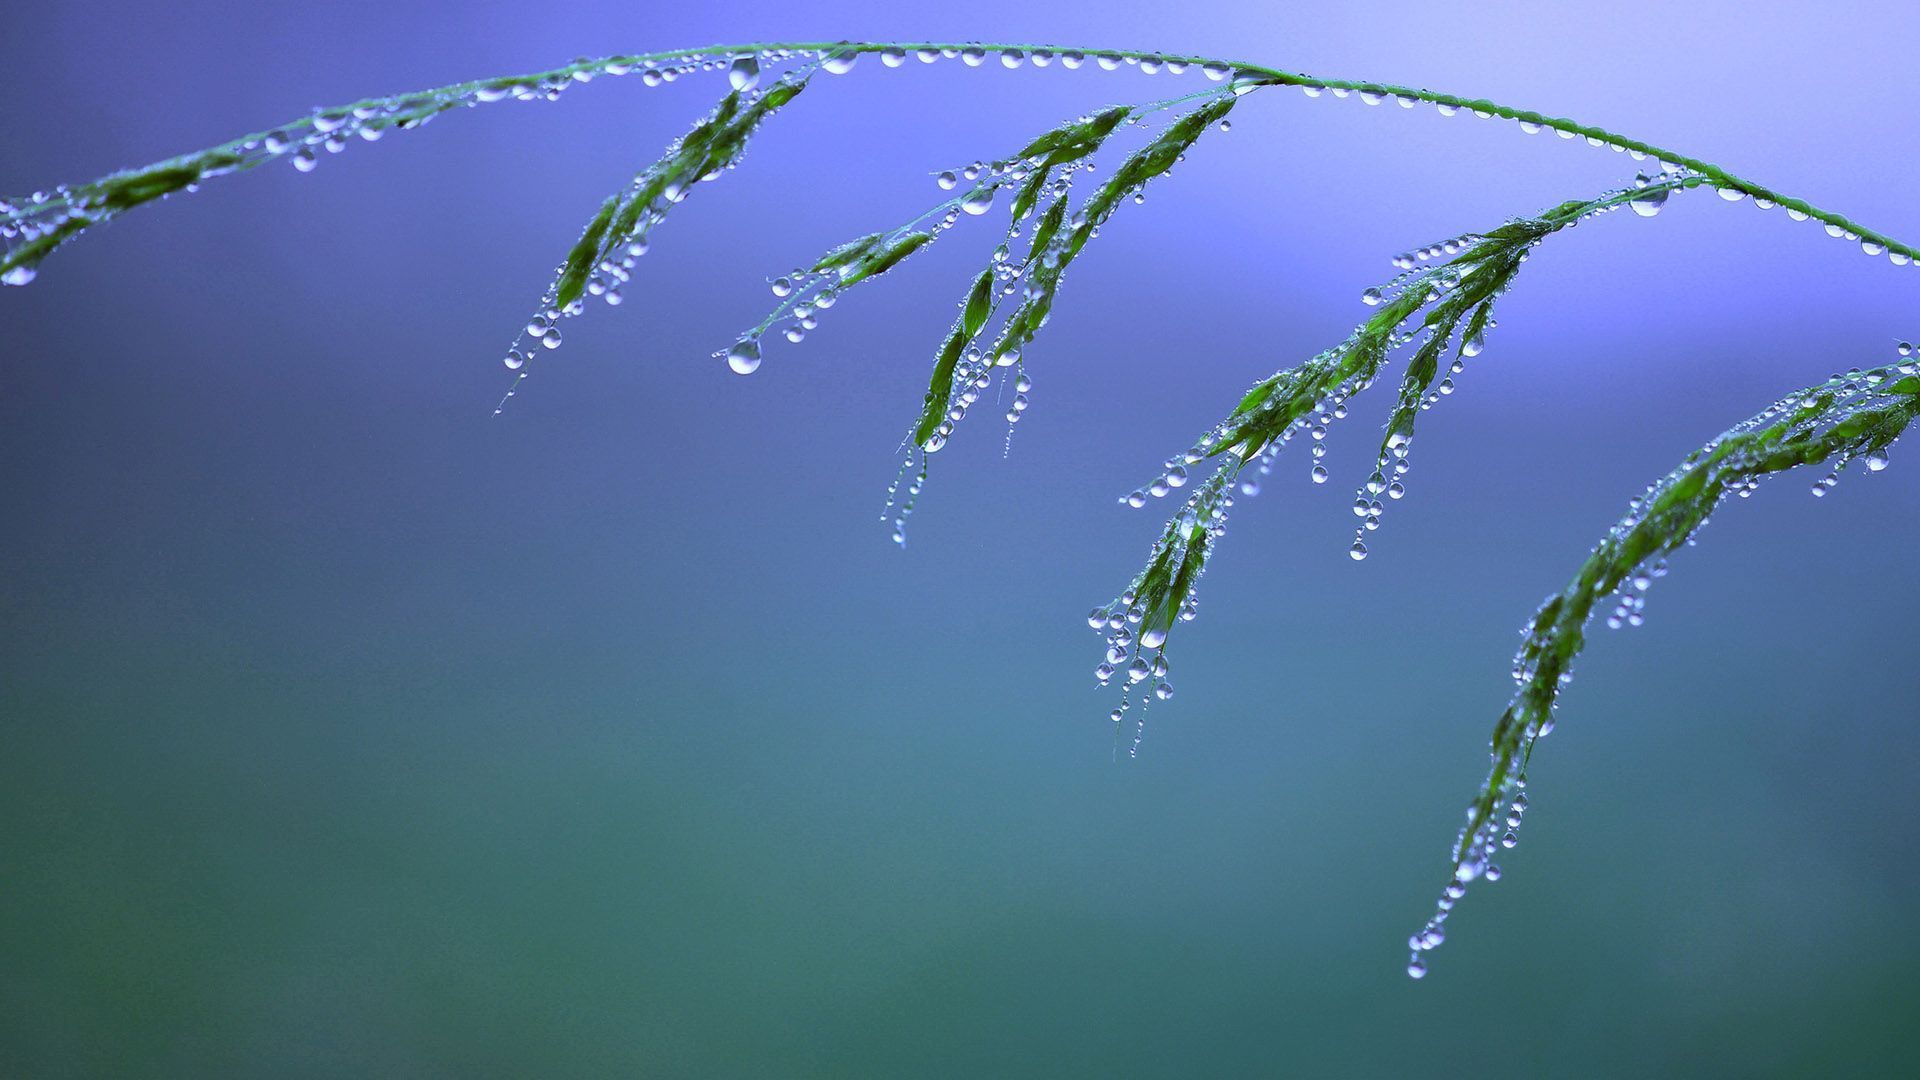 Water drops on the grass wallpaper #28189 1724 | m a c r o ...